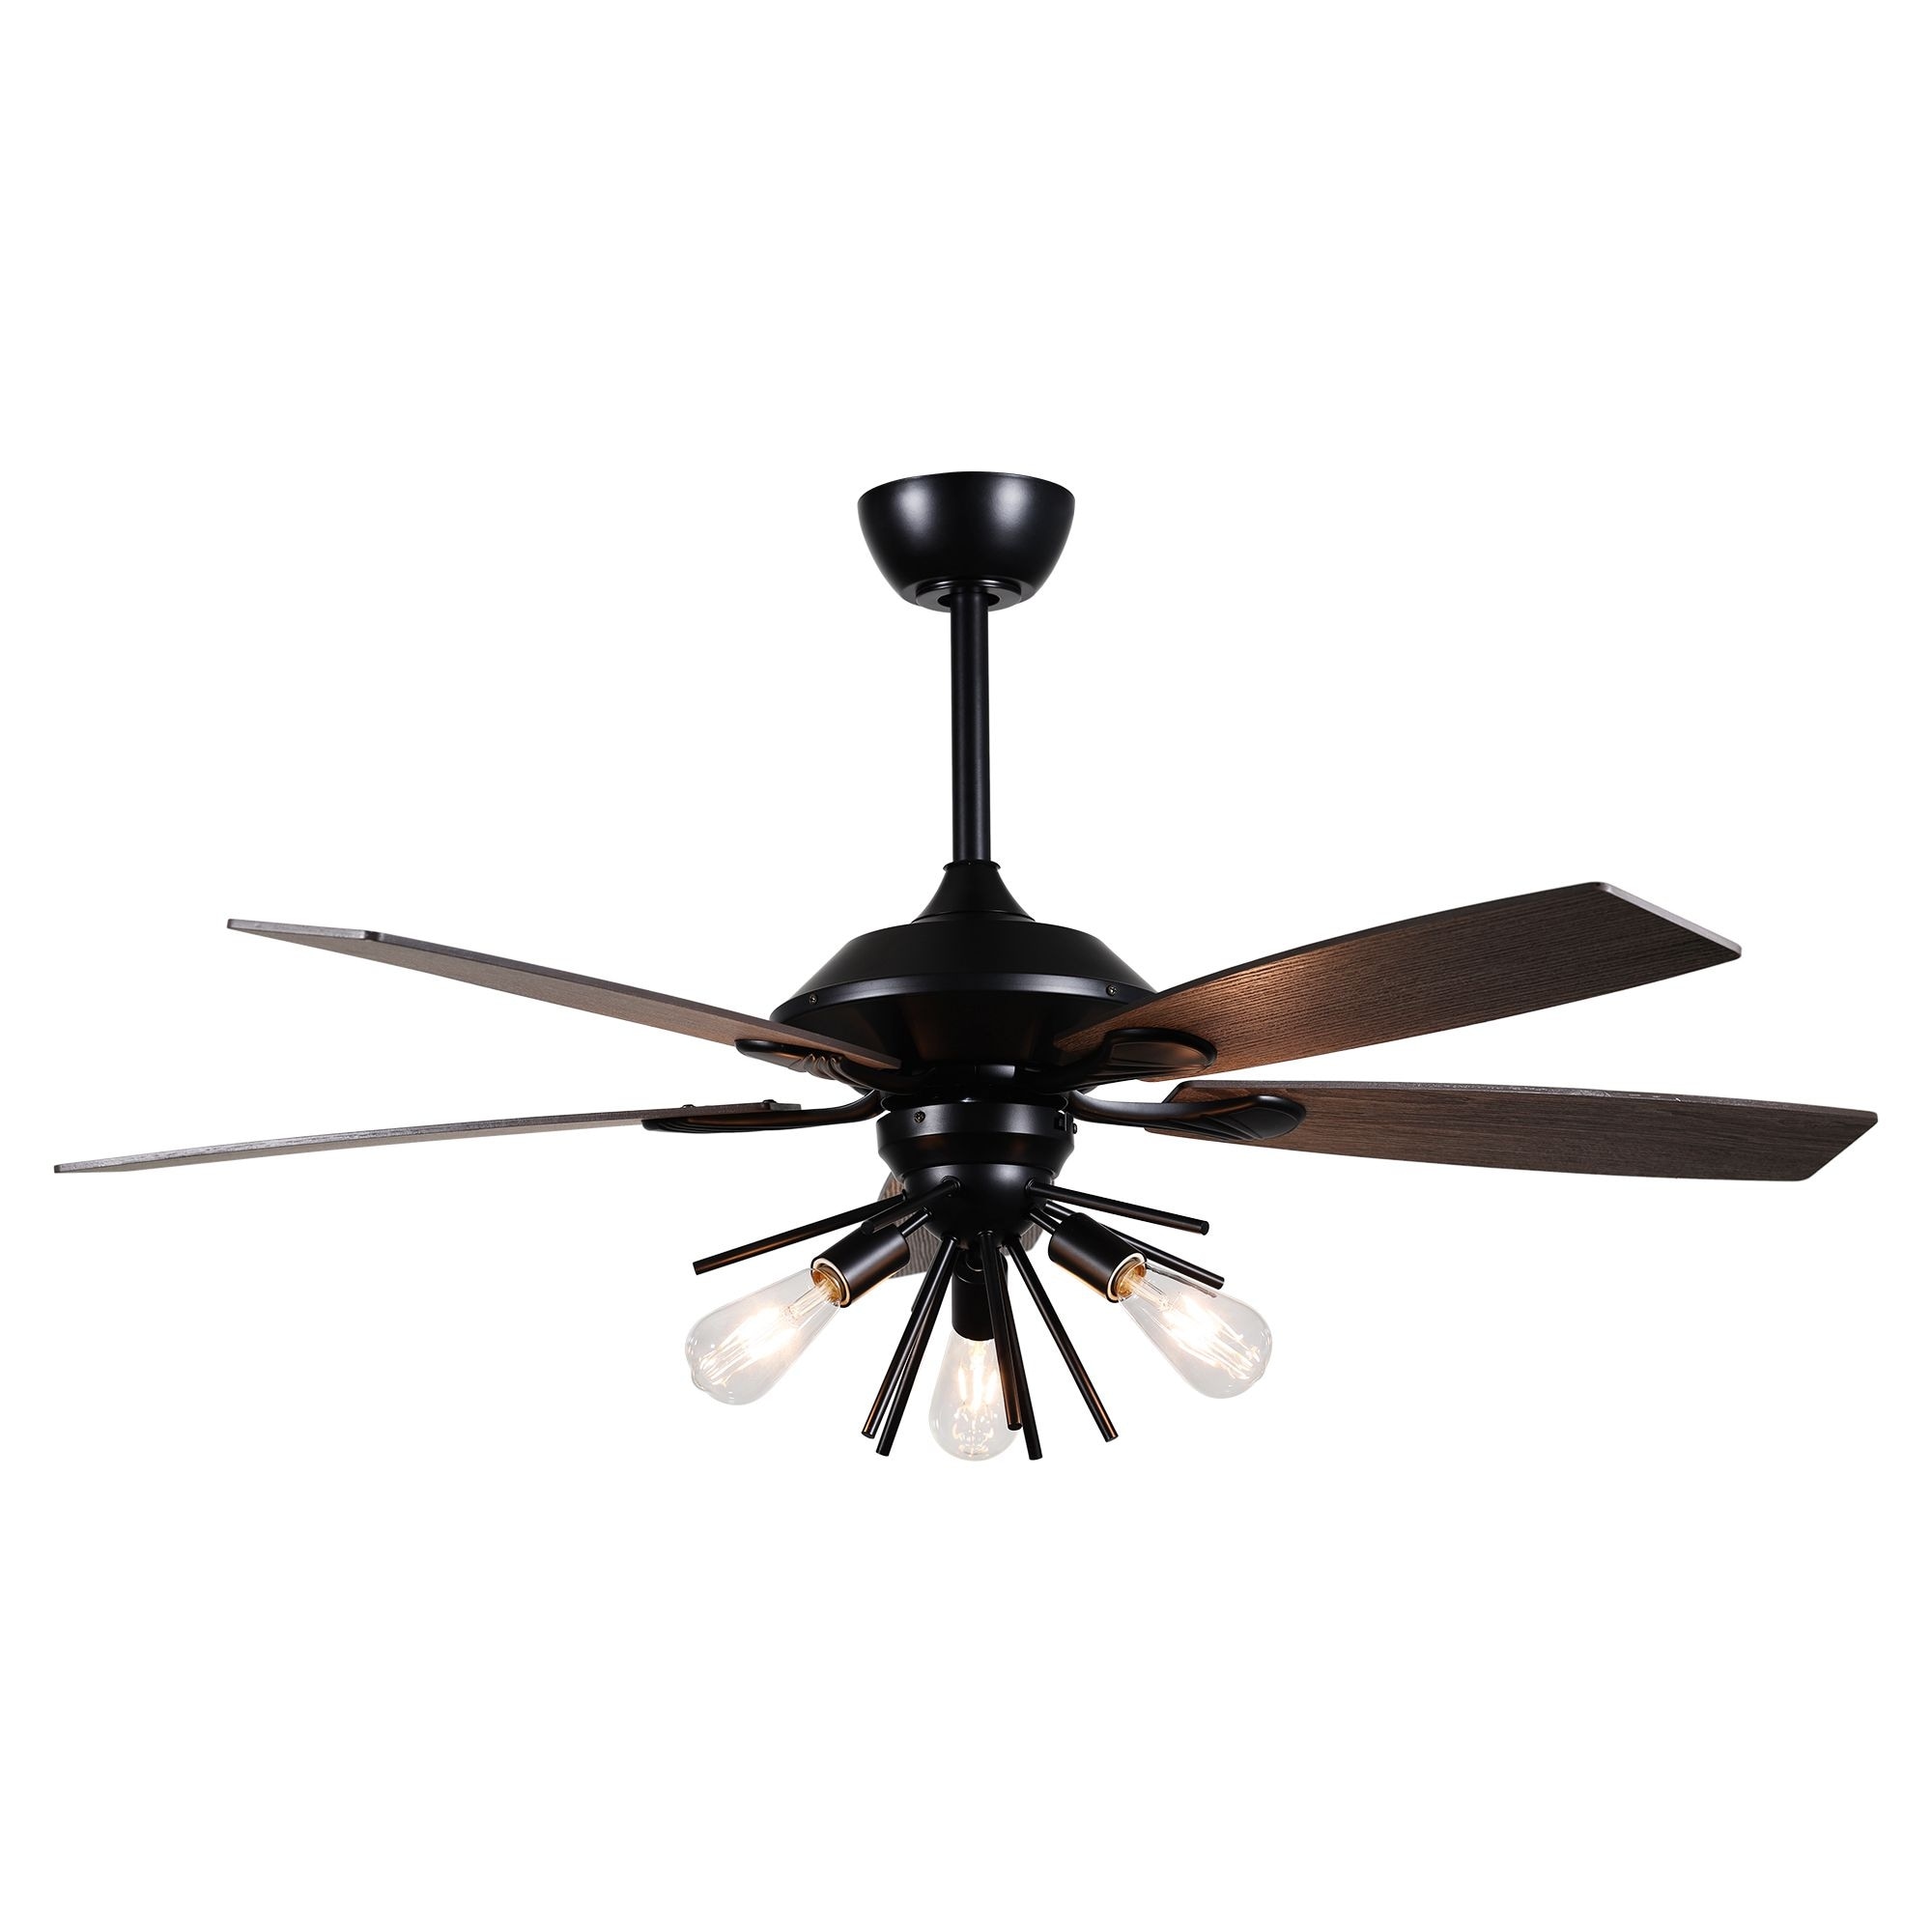 5 Solid Wood Board Fan Blades, 52-Inch Indoor/Outdoor Ceiling Fans Details about   Ceiling Fan 